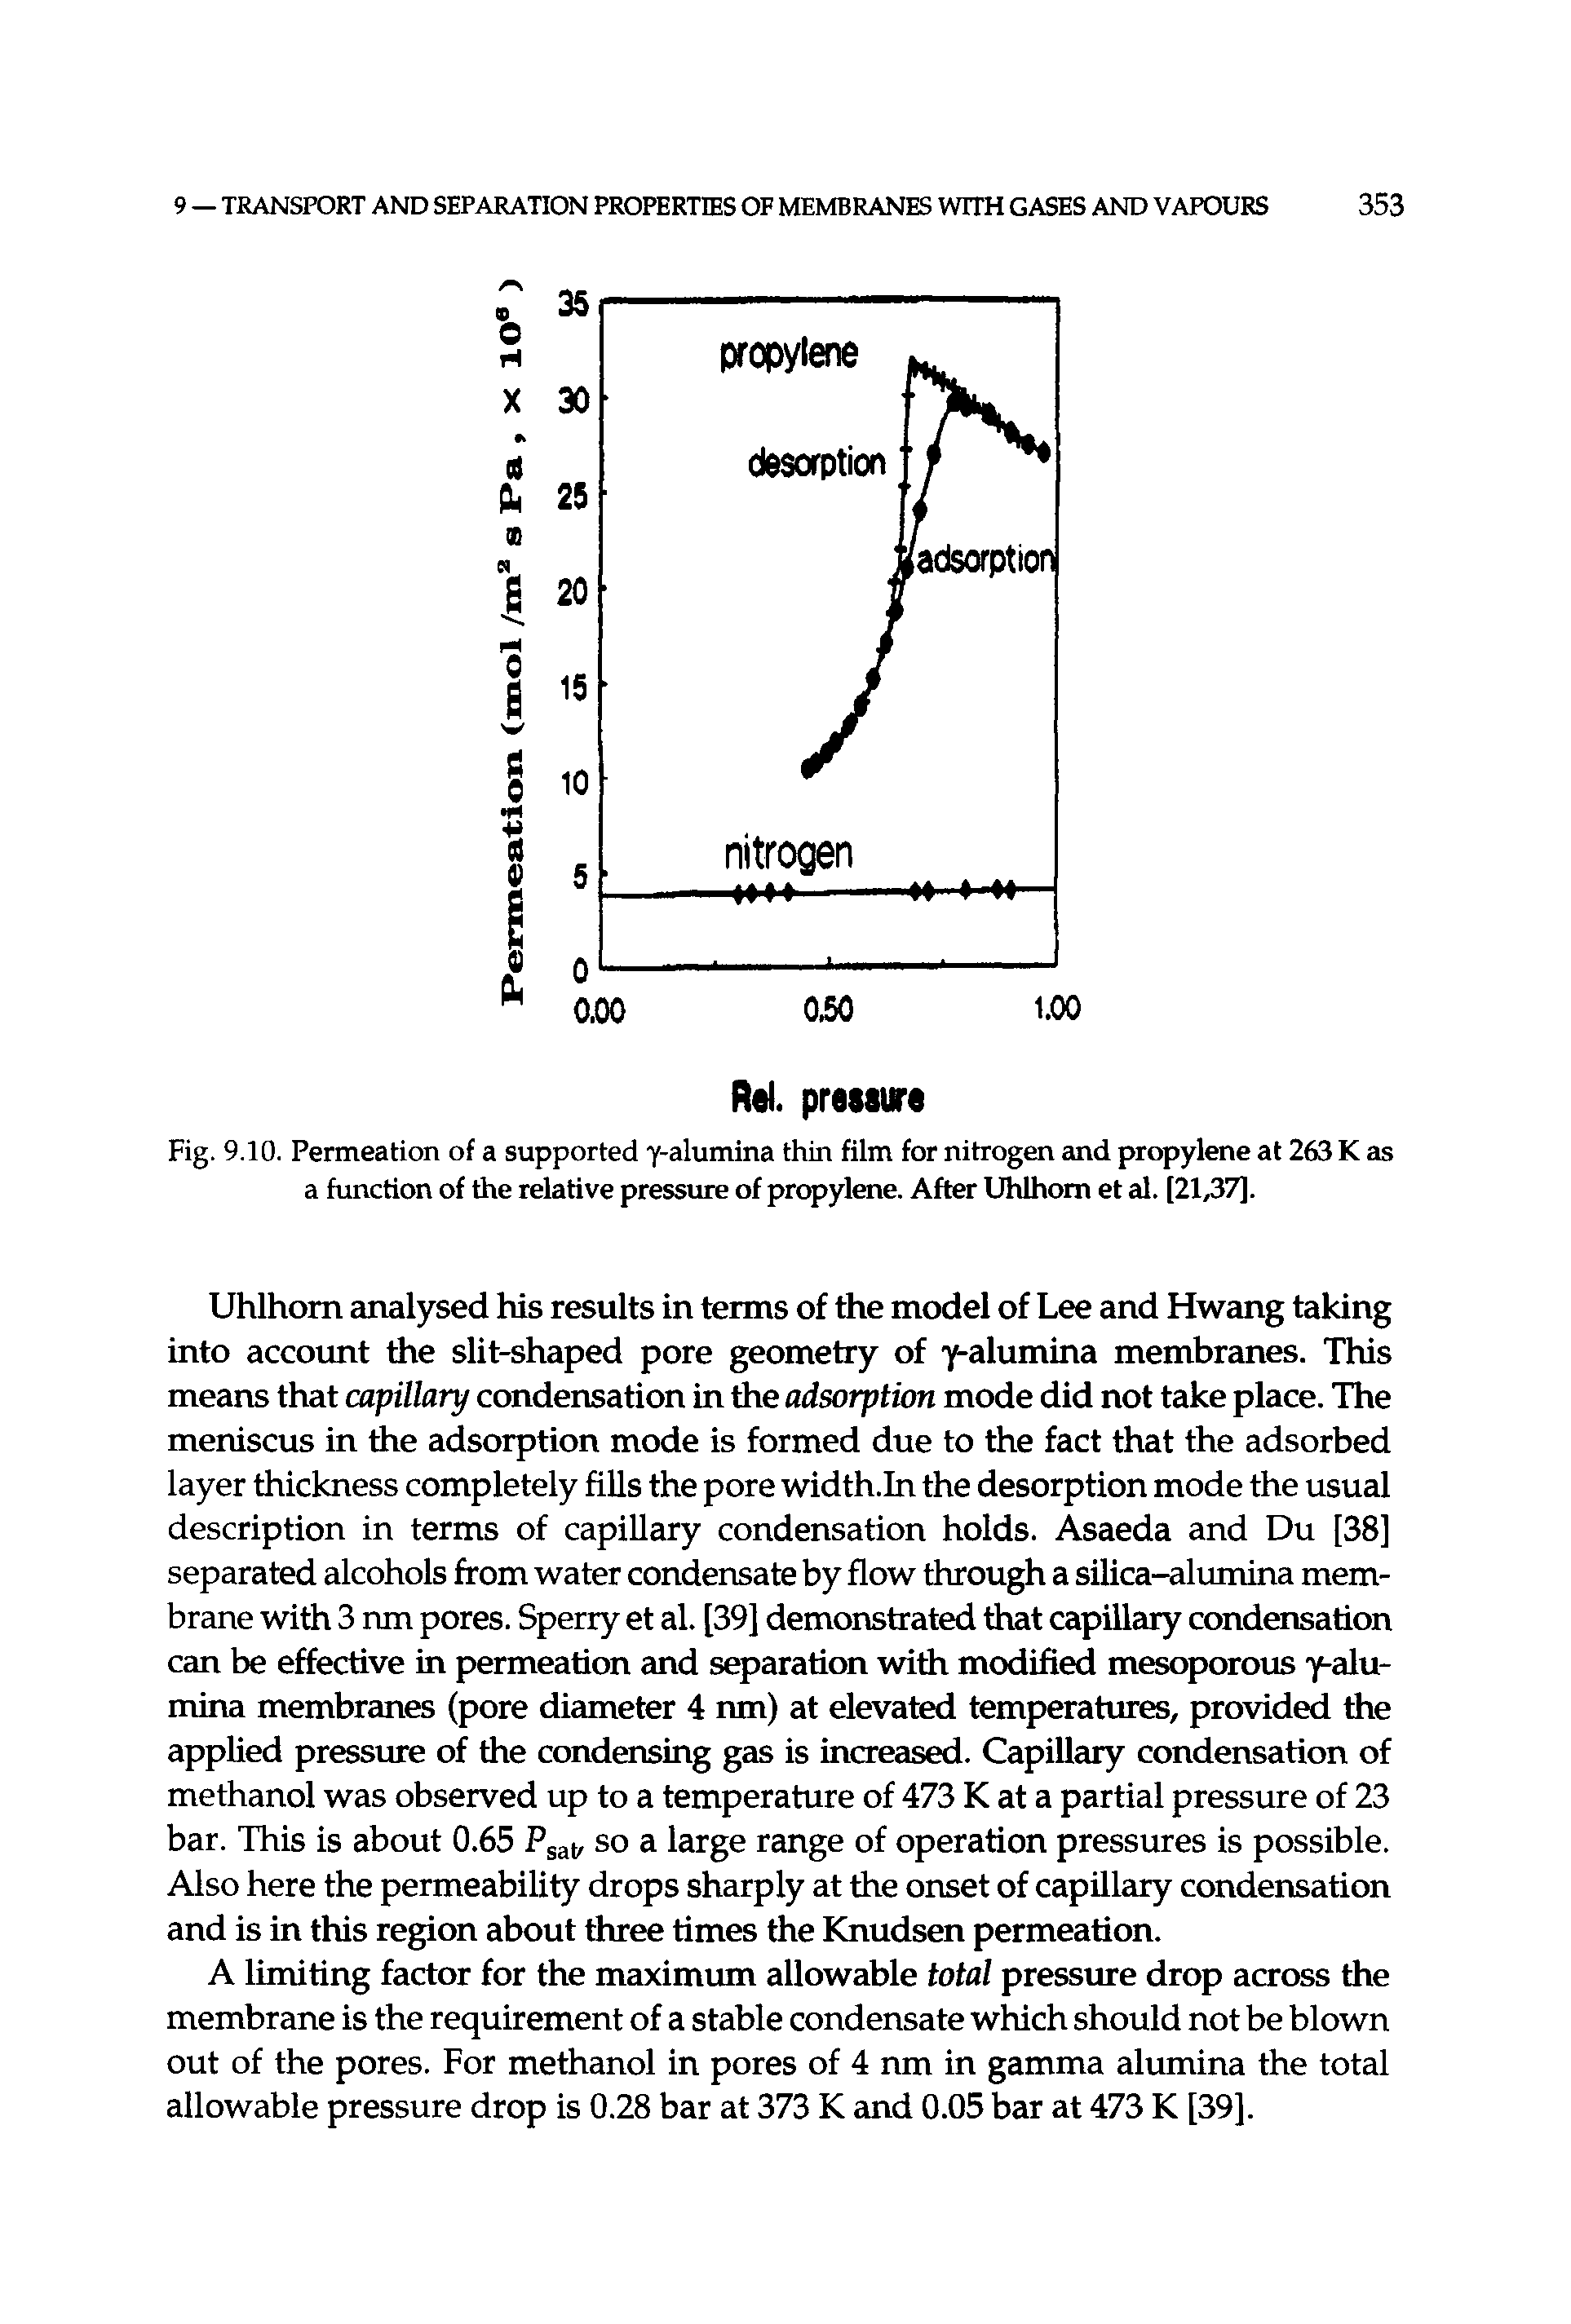 Fig. 9.10. Permeation of a supported 7-alumina thin film for nitrogen and propylene at 263 K as a function of the relative pressure of propylene. After Uhlhom et al. [21,37].